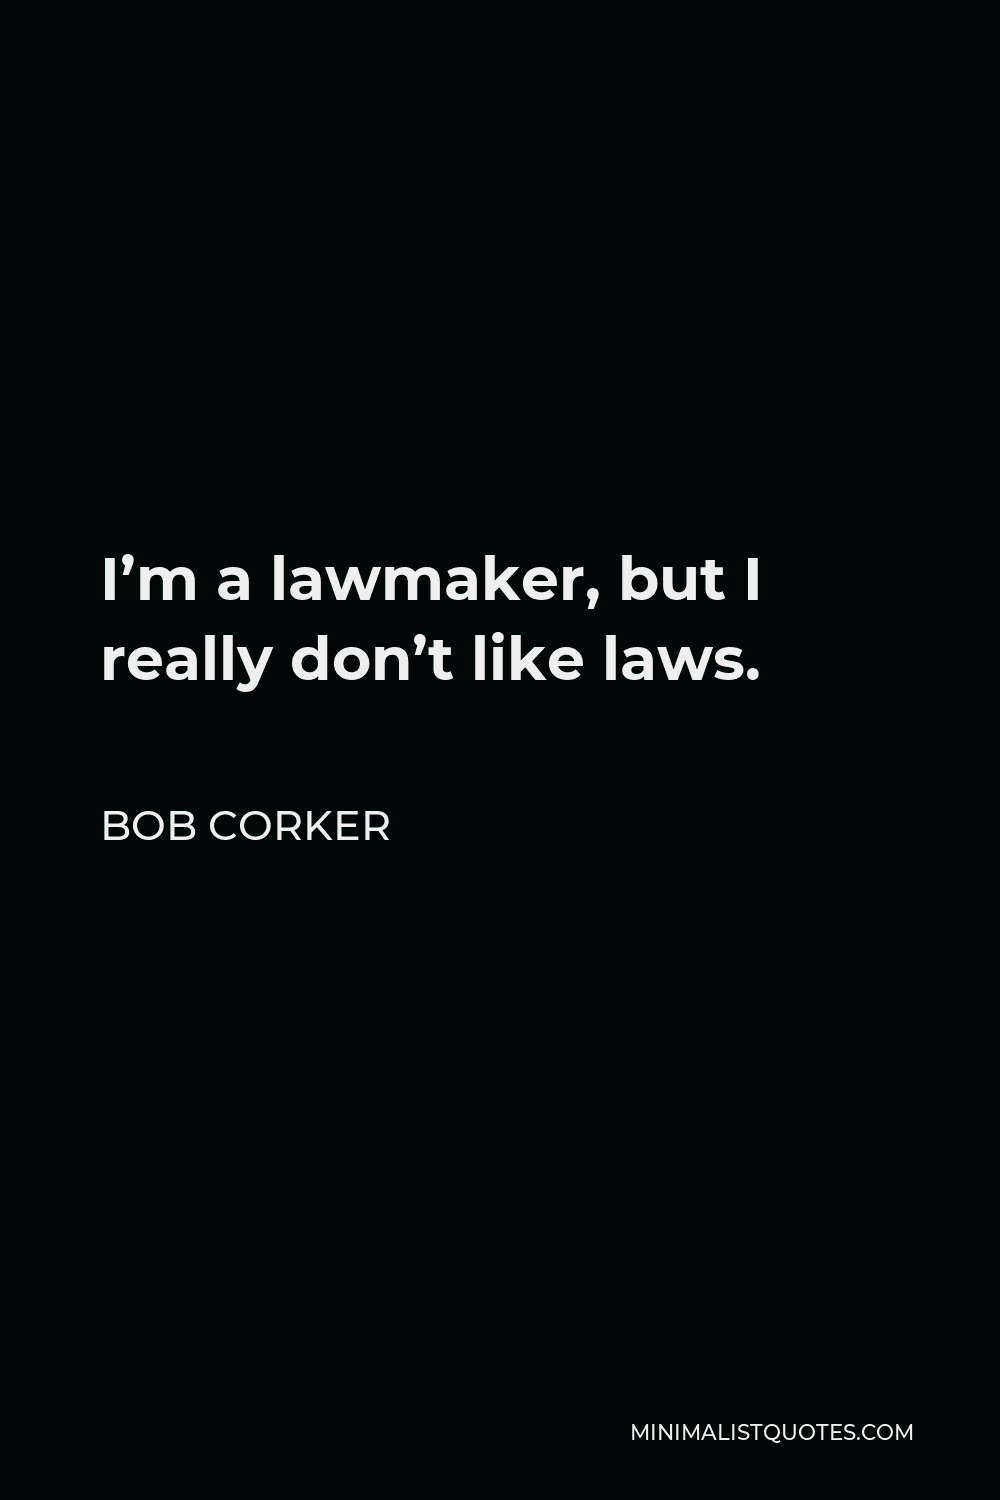 Bob Corker Quote - I’m a lawmaker, but I really don’t like laws.